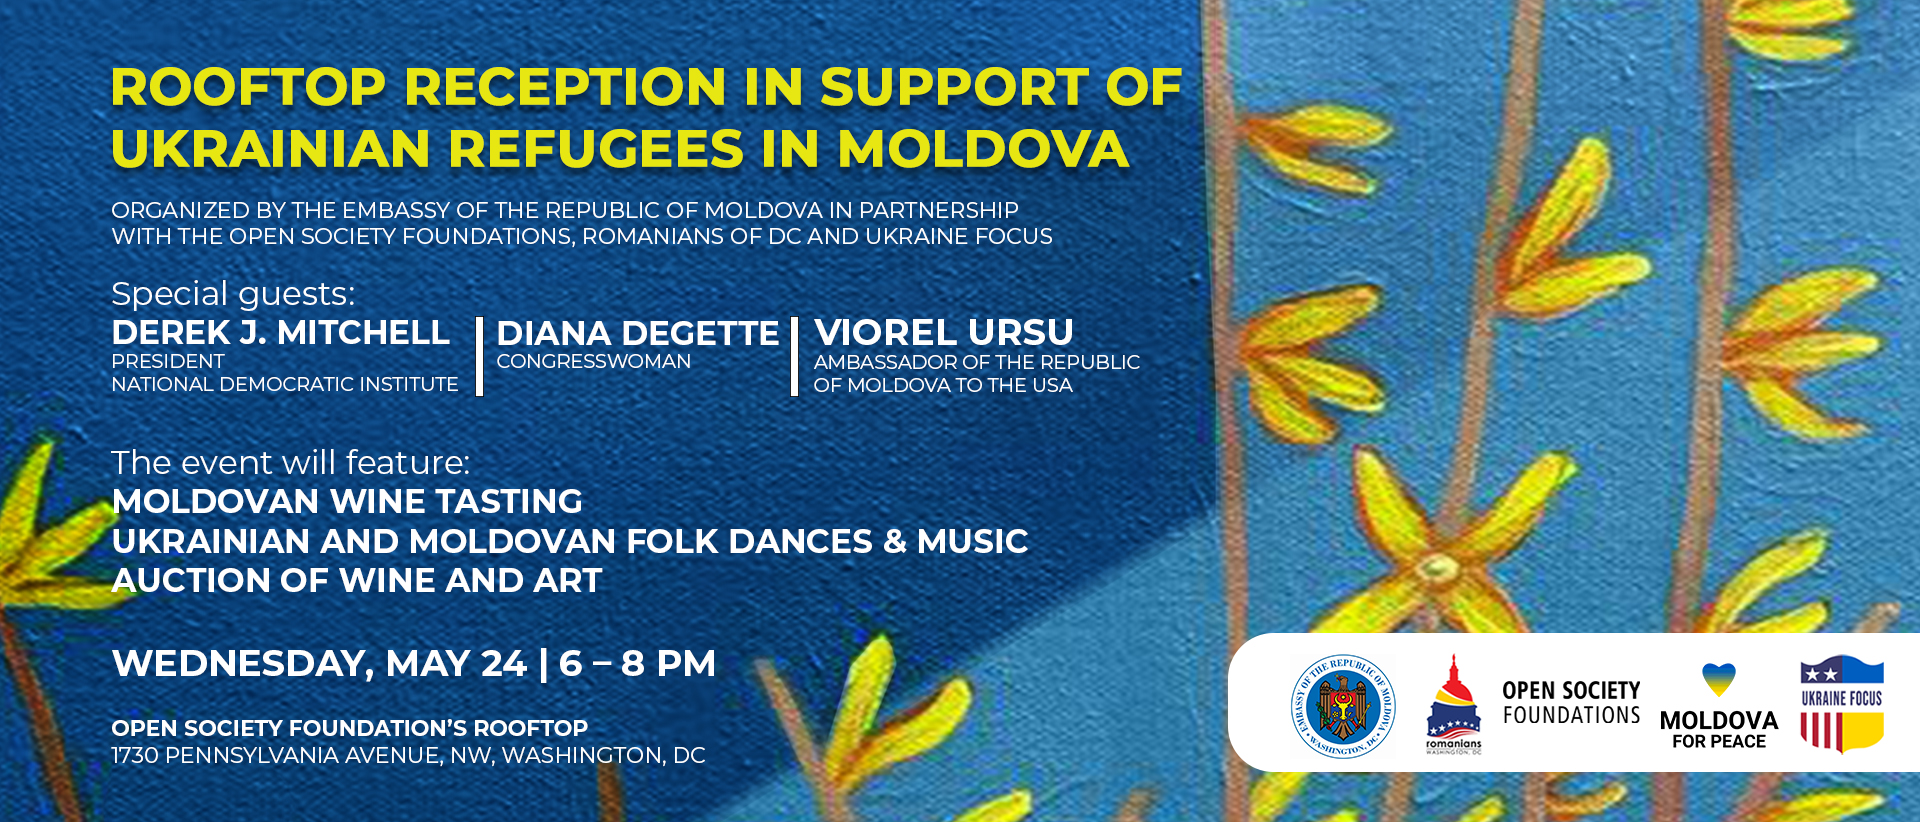 Rooftop Reception in Support of Ukrainian Refugees in Moldova